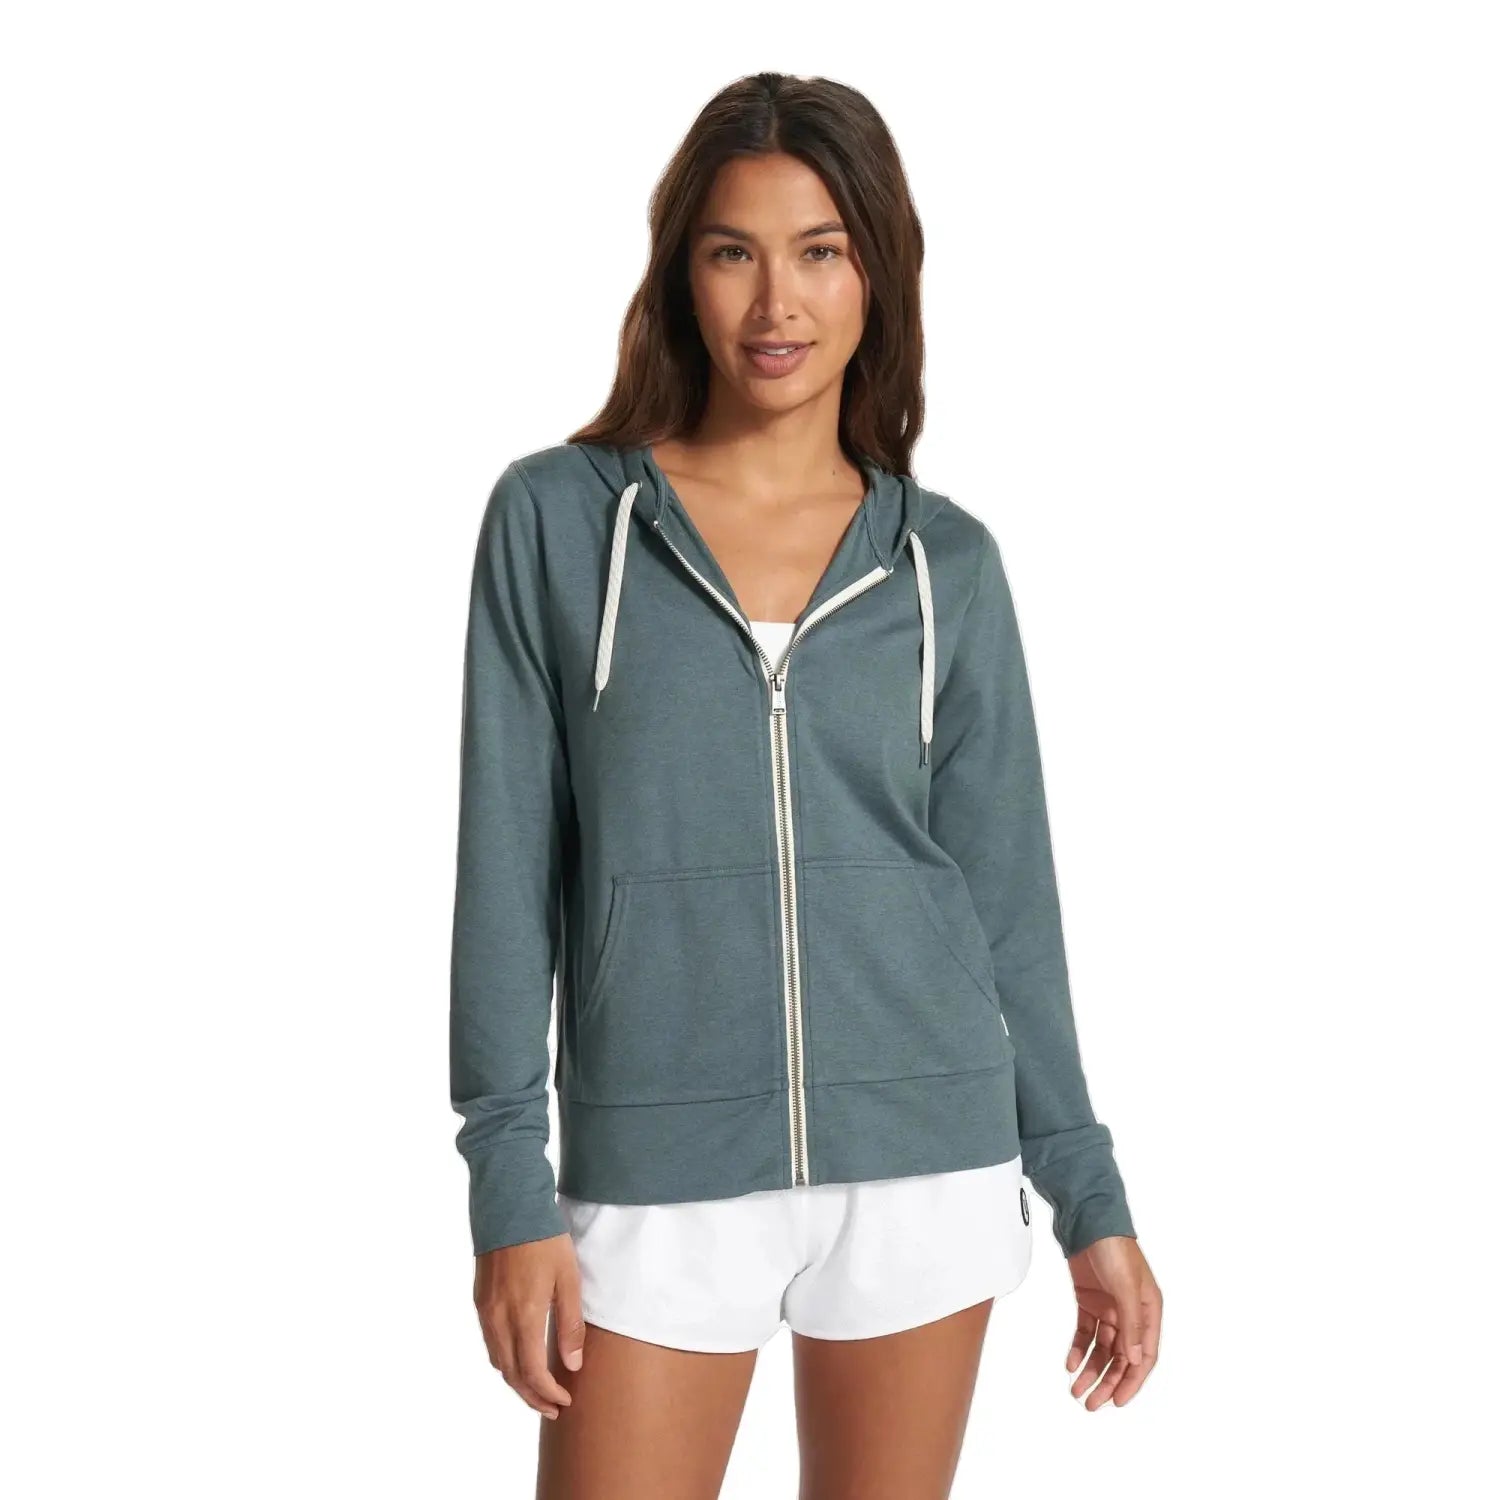 Vuori Women's Halo Performance Hoodie 2.0 shown in Lake Heather on model. Front view.